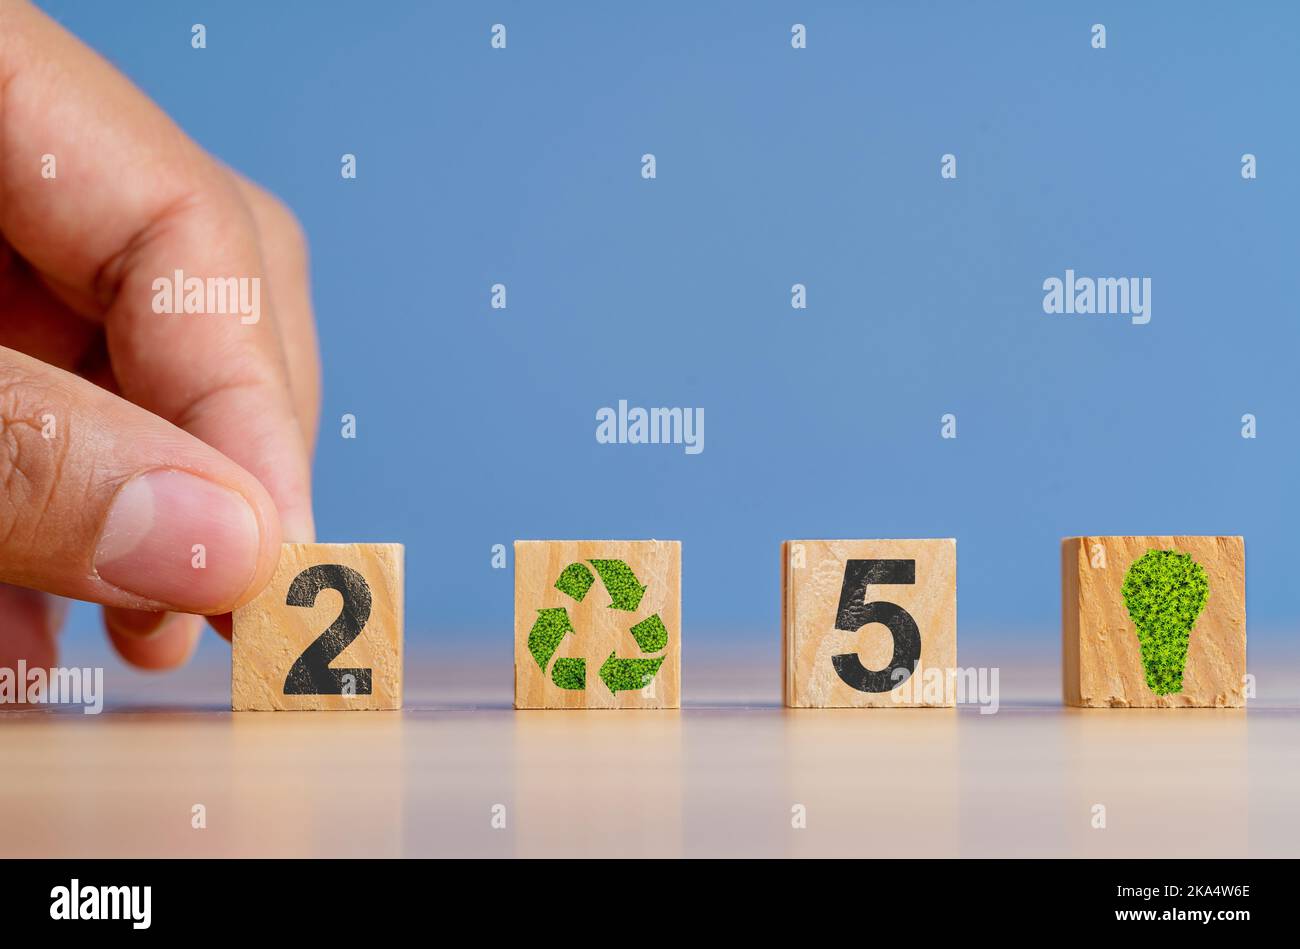 Hand holding wooden blocks with 2050 numbers mocked up as a symbol of net zero carbon emission target. Concept of carbon free atmosphere. Stock Photo